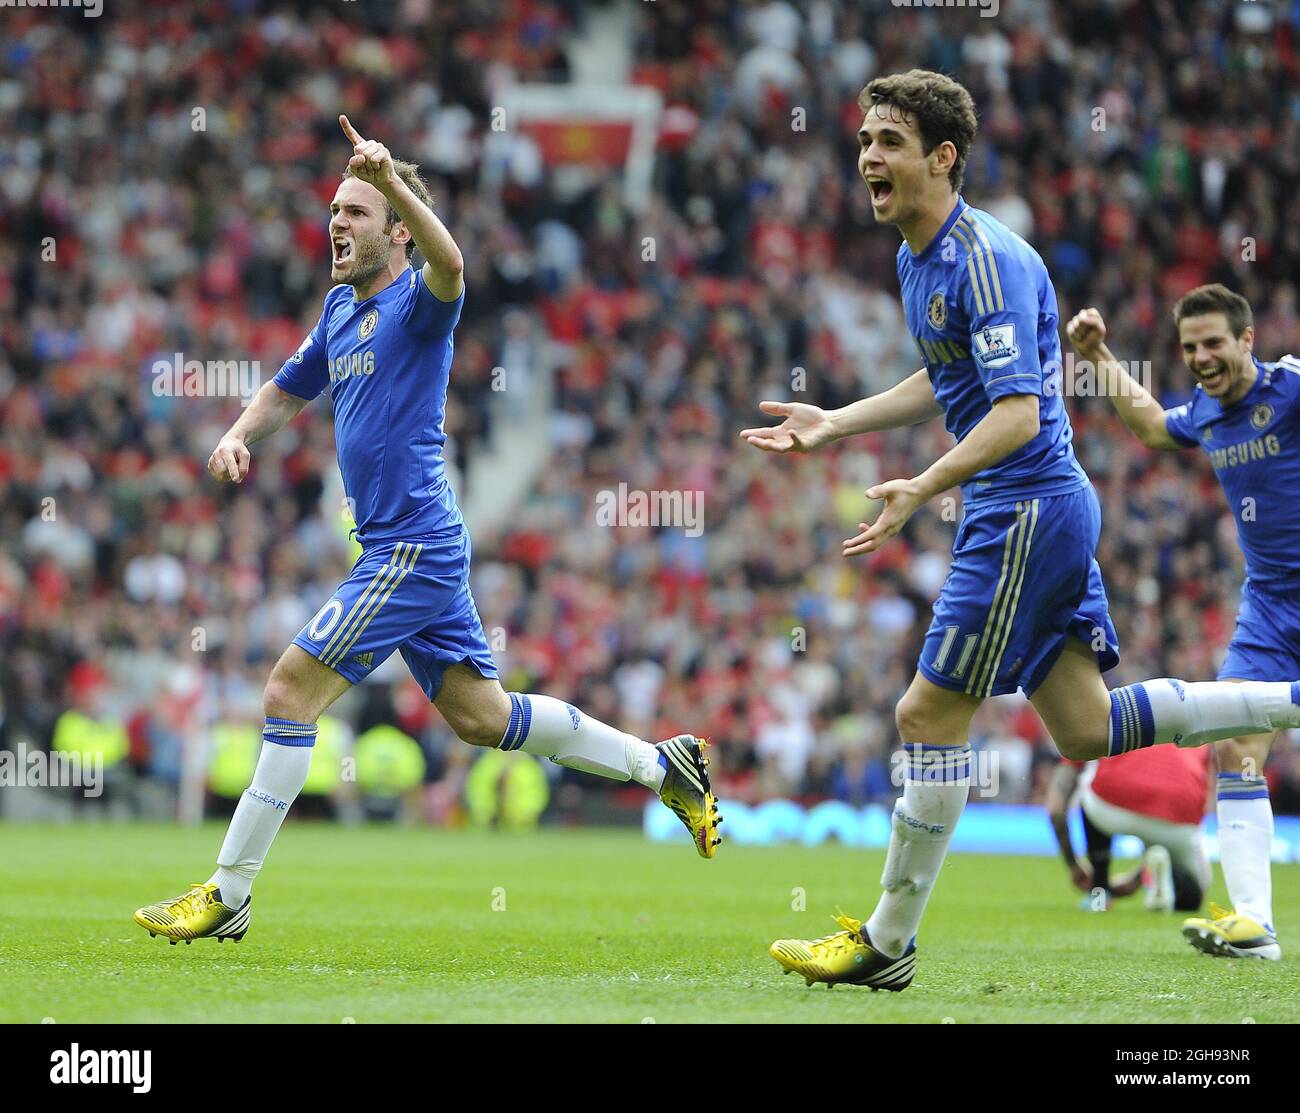 Juan Mata of Chelsea celebrates scoring the winning goal during the Barclays Premier League match between Manchester United and Chelsea in Old Trafford Stadium on May 05, 2013. Photo by Simon Bellis Stock Photo